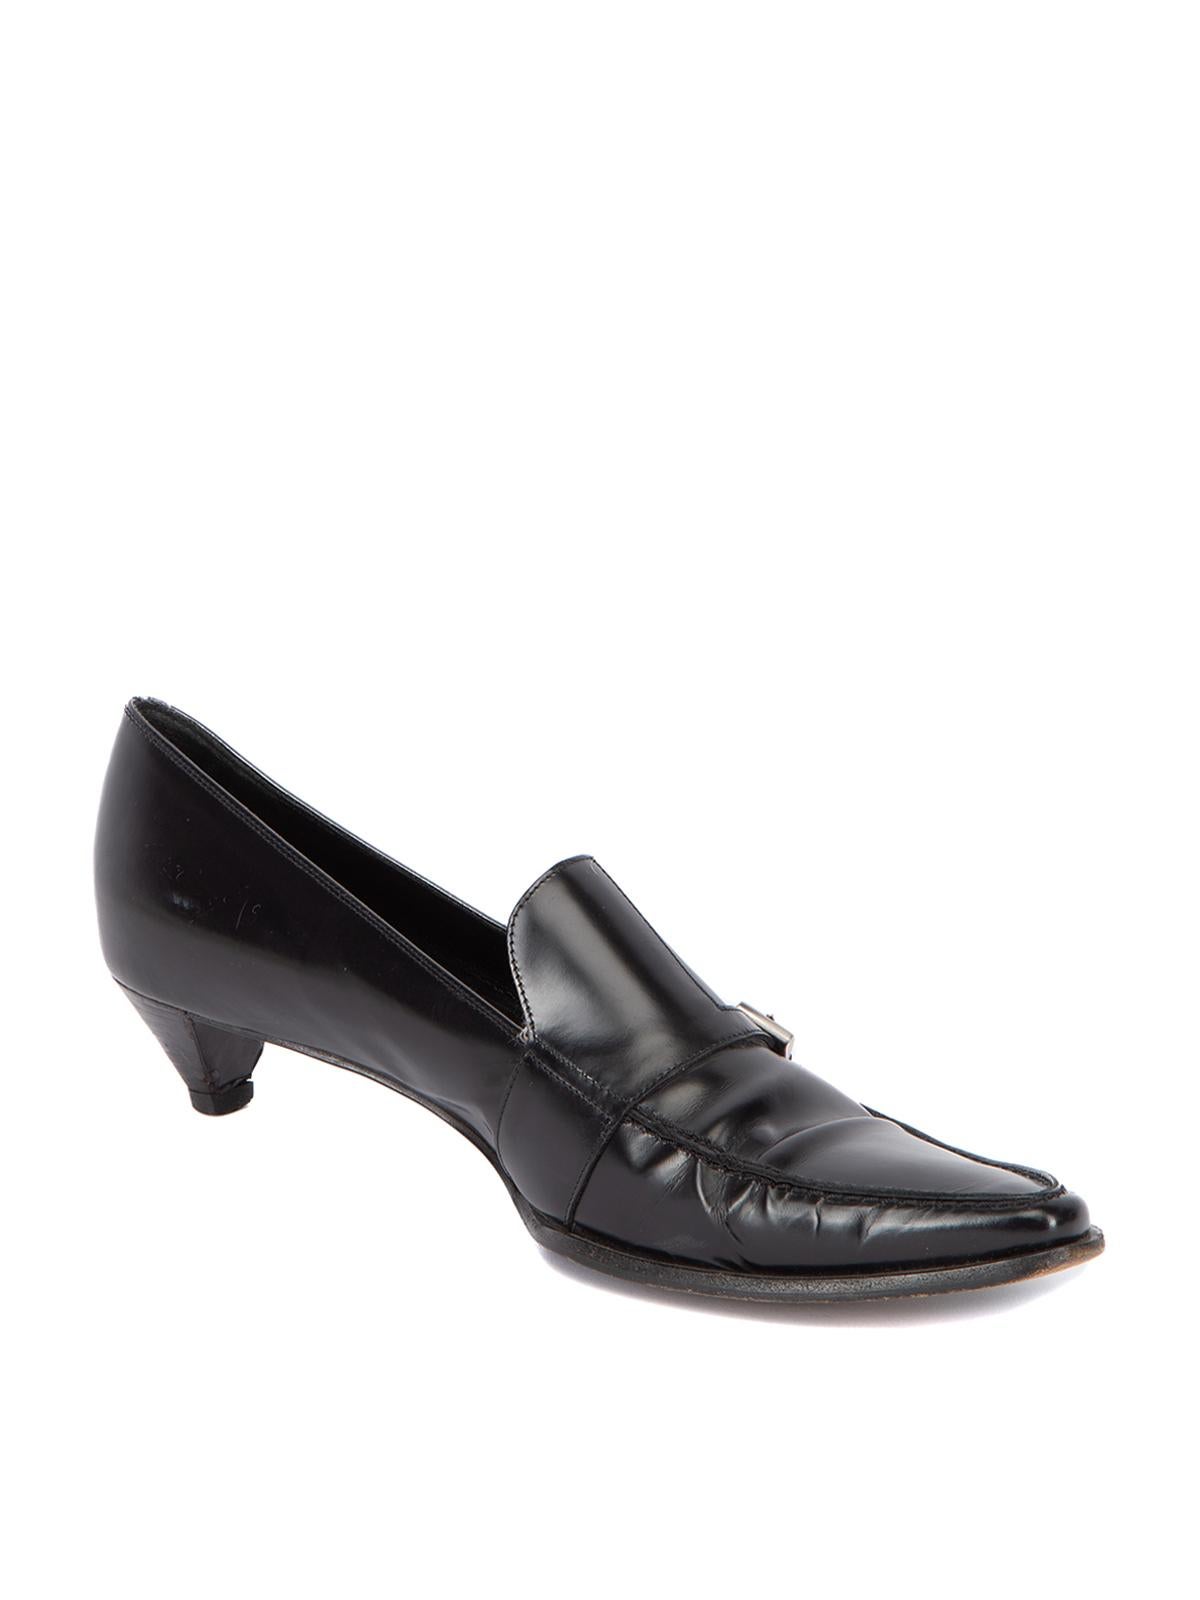 CONDITION is Very good. Minimal wear to loafers is evident. Minimal wear/scuffs to leather exterior. There is also visible scuffs and wear to the heel stem and outsole on this used Prada designer resale item. This item comes with original dust bags.